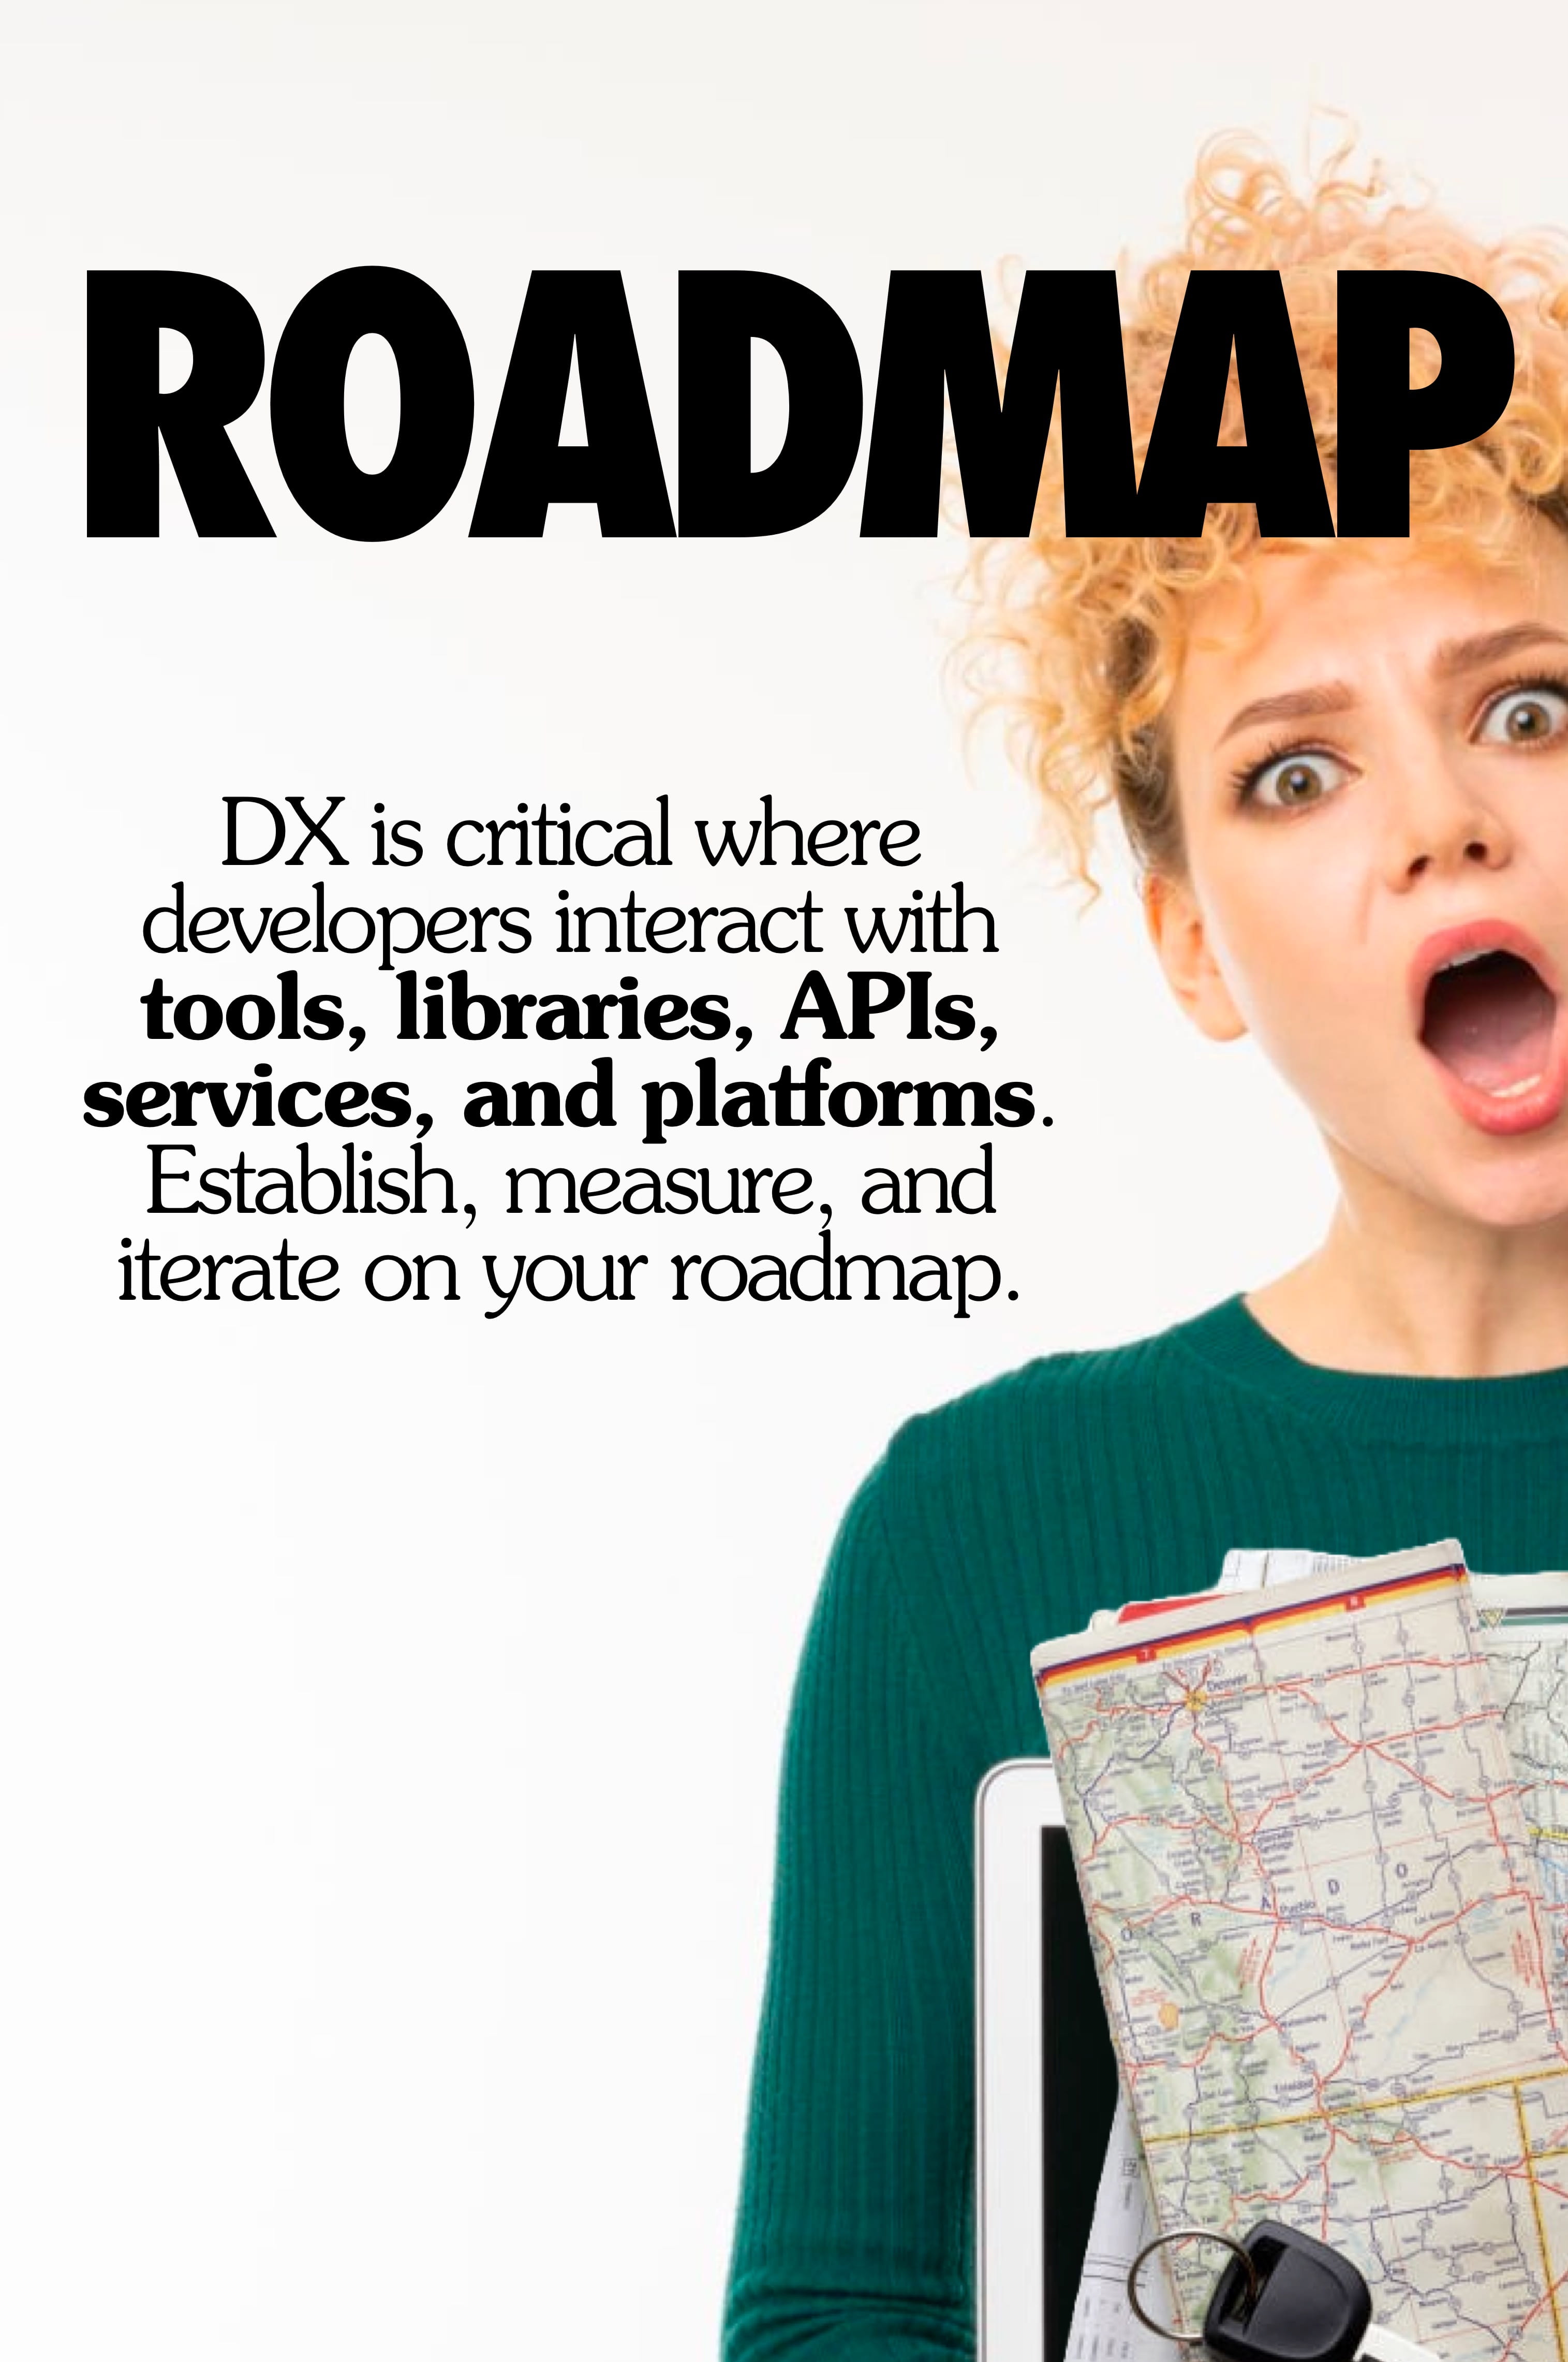 An image of a roadmap labeled dx roadmap with various milestones and dates marked along the way. DX is critical for all products where developers interact with tools, libraries, APIs, services, and platforms. Establish, measure, and iterate on your roadmap.